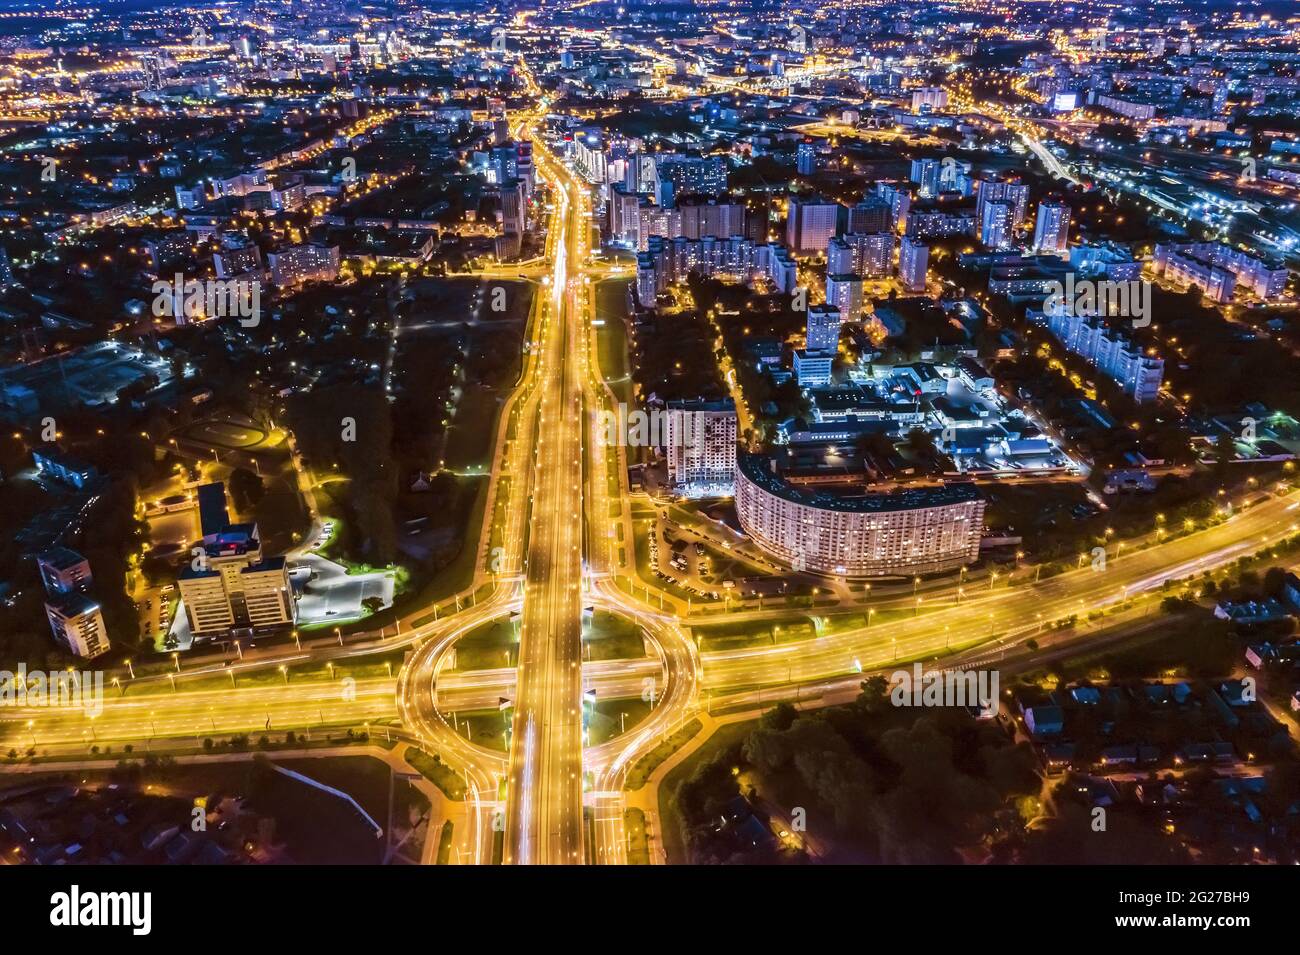 aerial panoramic view of roundabout intersection in residential area at night Stock Photo